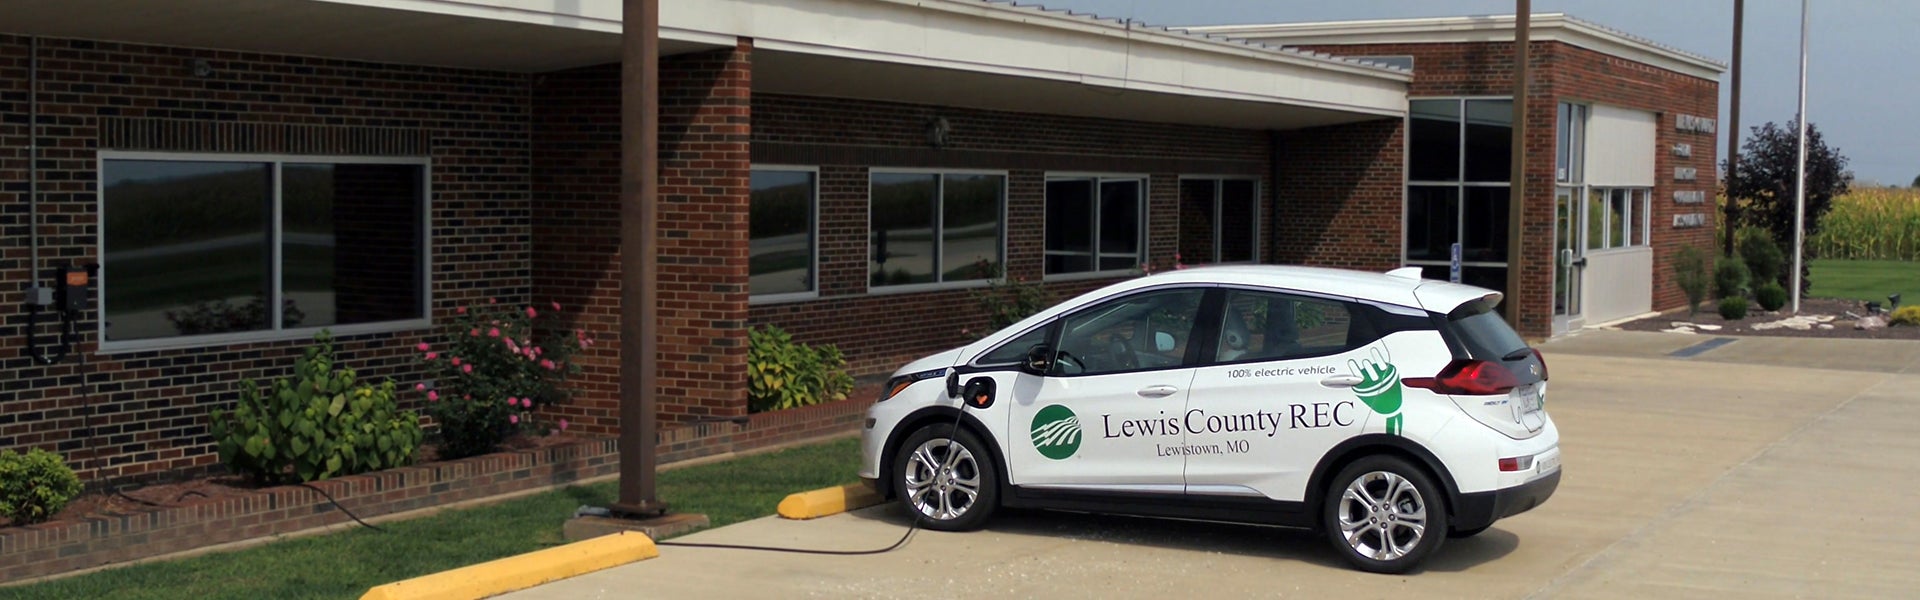 Lewis County REC Electric Vehicle